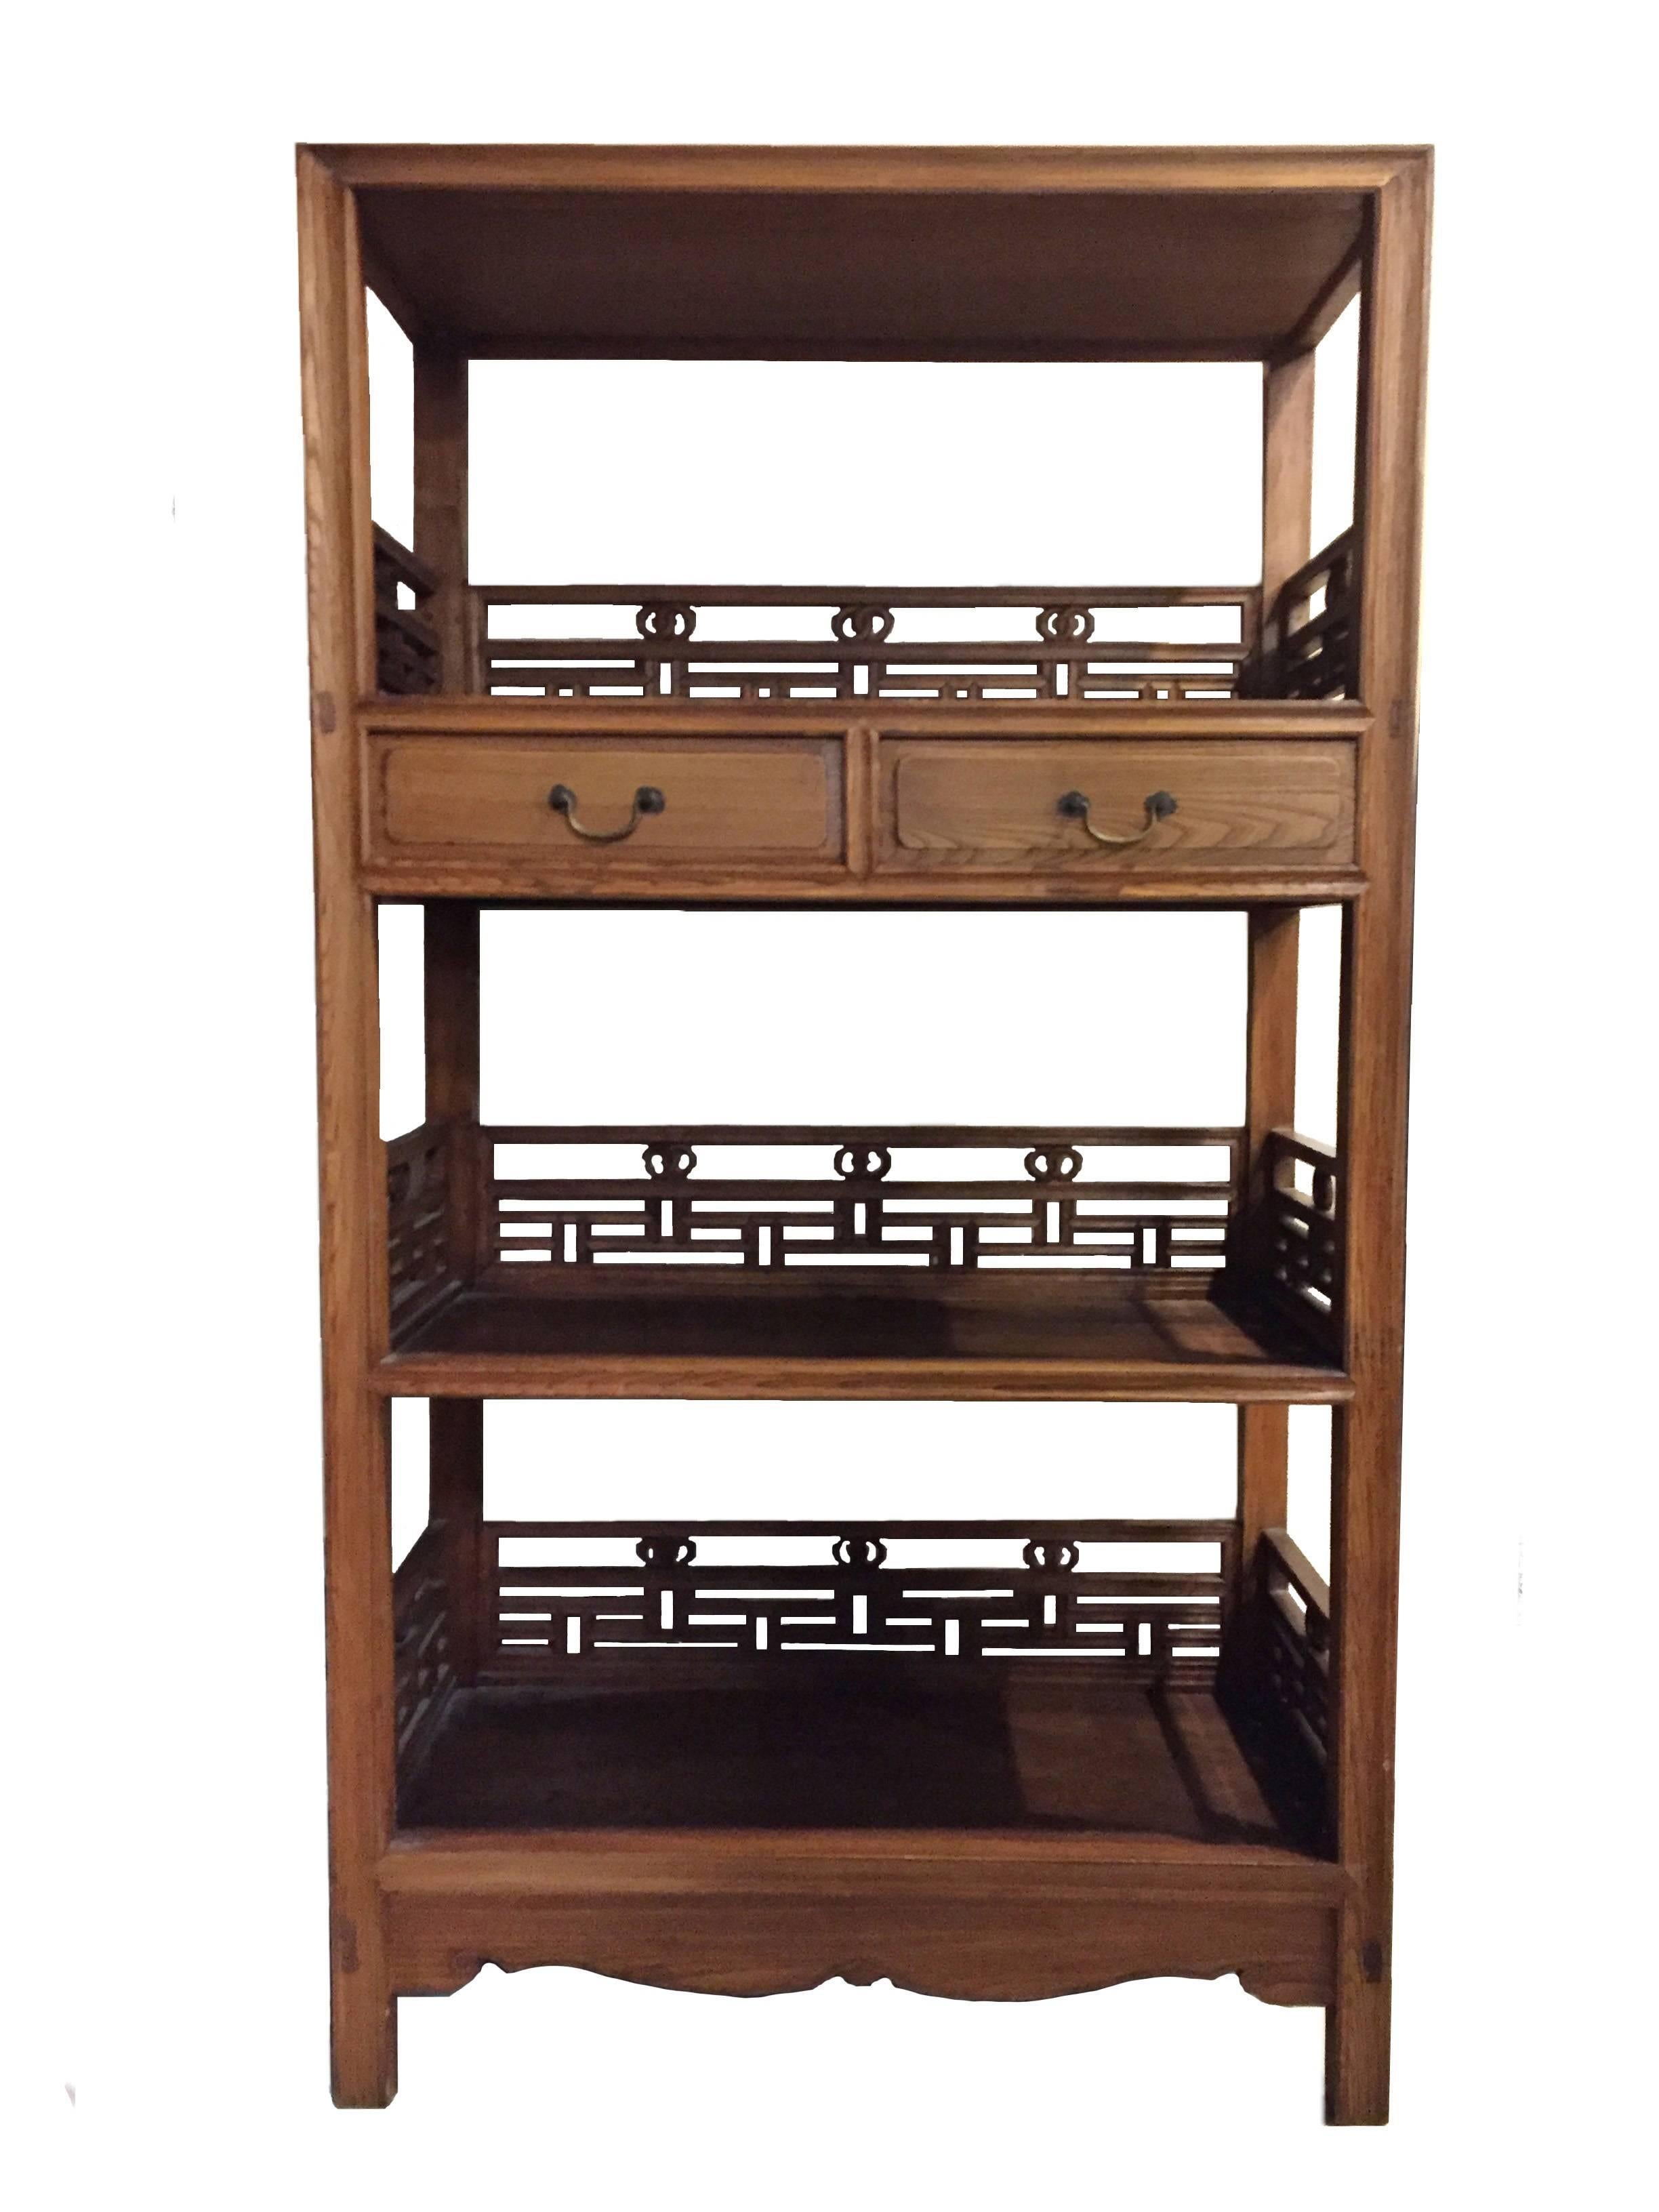 Here we have a pair of very handsome elm wood book cases. The design is clearly of Ming origin, with its simple, straight lines void of decoration. The choice of wood and skill of the craftsman become critical in such a design for such a function,